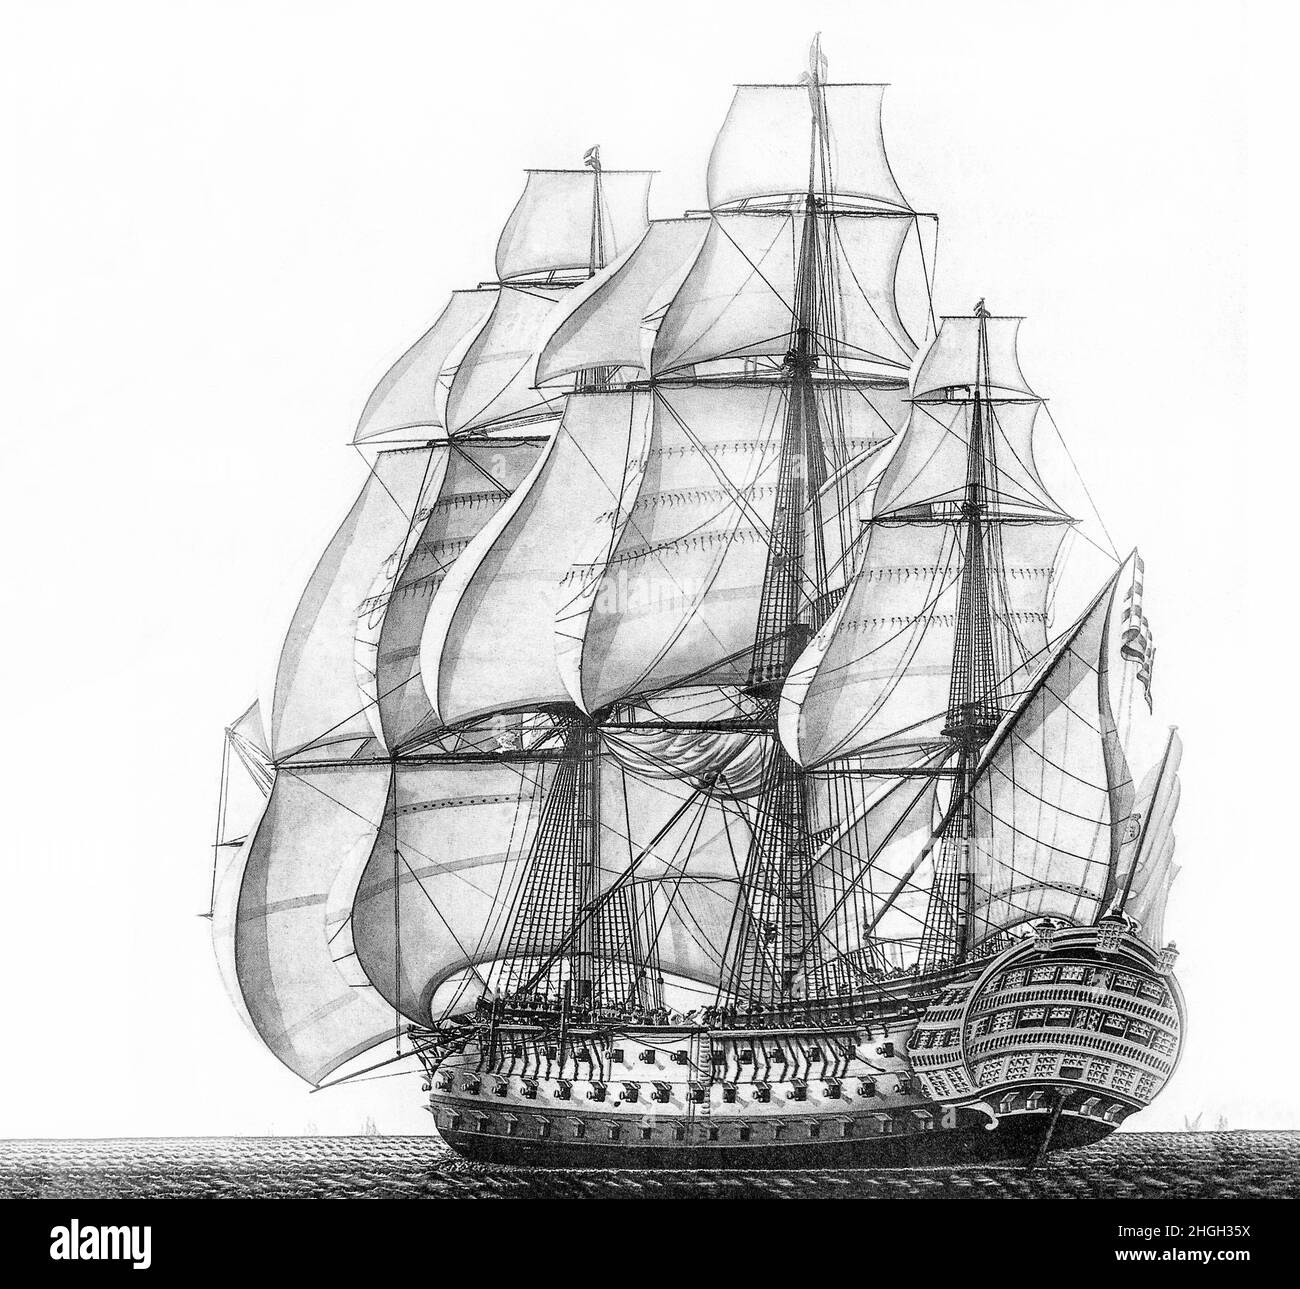 A monochrome illustration of the Spanish ship 'Santísima Trinidad', a Spanish first-rate ship of the line with 112 guns. This was increased to 140 guns around 1802, thus creating what was in effect a continuous fourth gundeck although the extra guns added were actually relatively small. She was the heaviest-armed ship in the world when rebuilt, and bore the most guns of any ship of the line outfitted in the Age of Sail.  she took part in the Battle of Trafalgar on October 21, 1805, as part of the combined Franco-Spanish fleet. Stock Photo